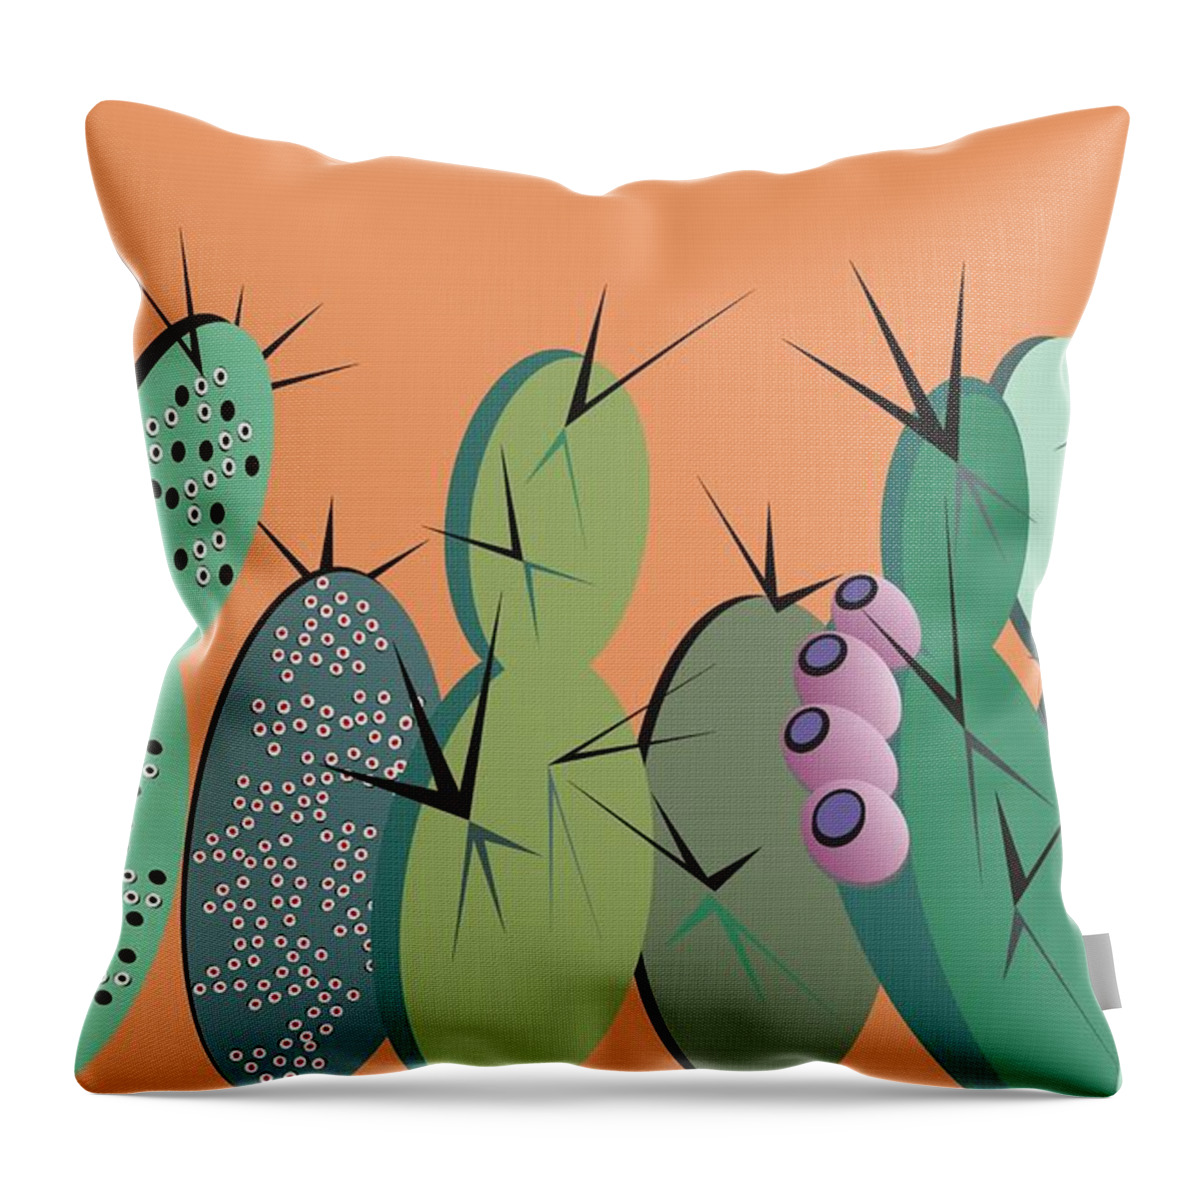 Cactus Throw Pillow featuring the digital art Cactus Party by Ted Clifton